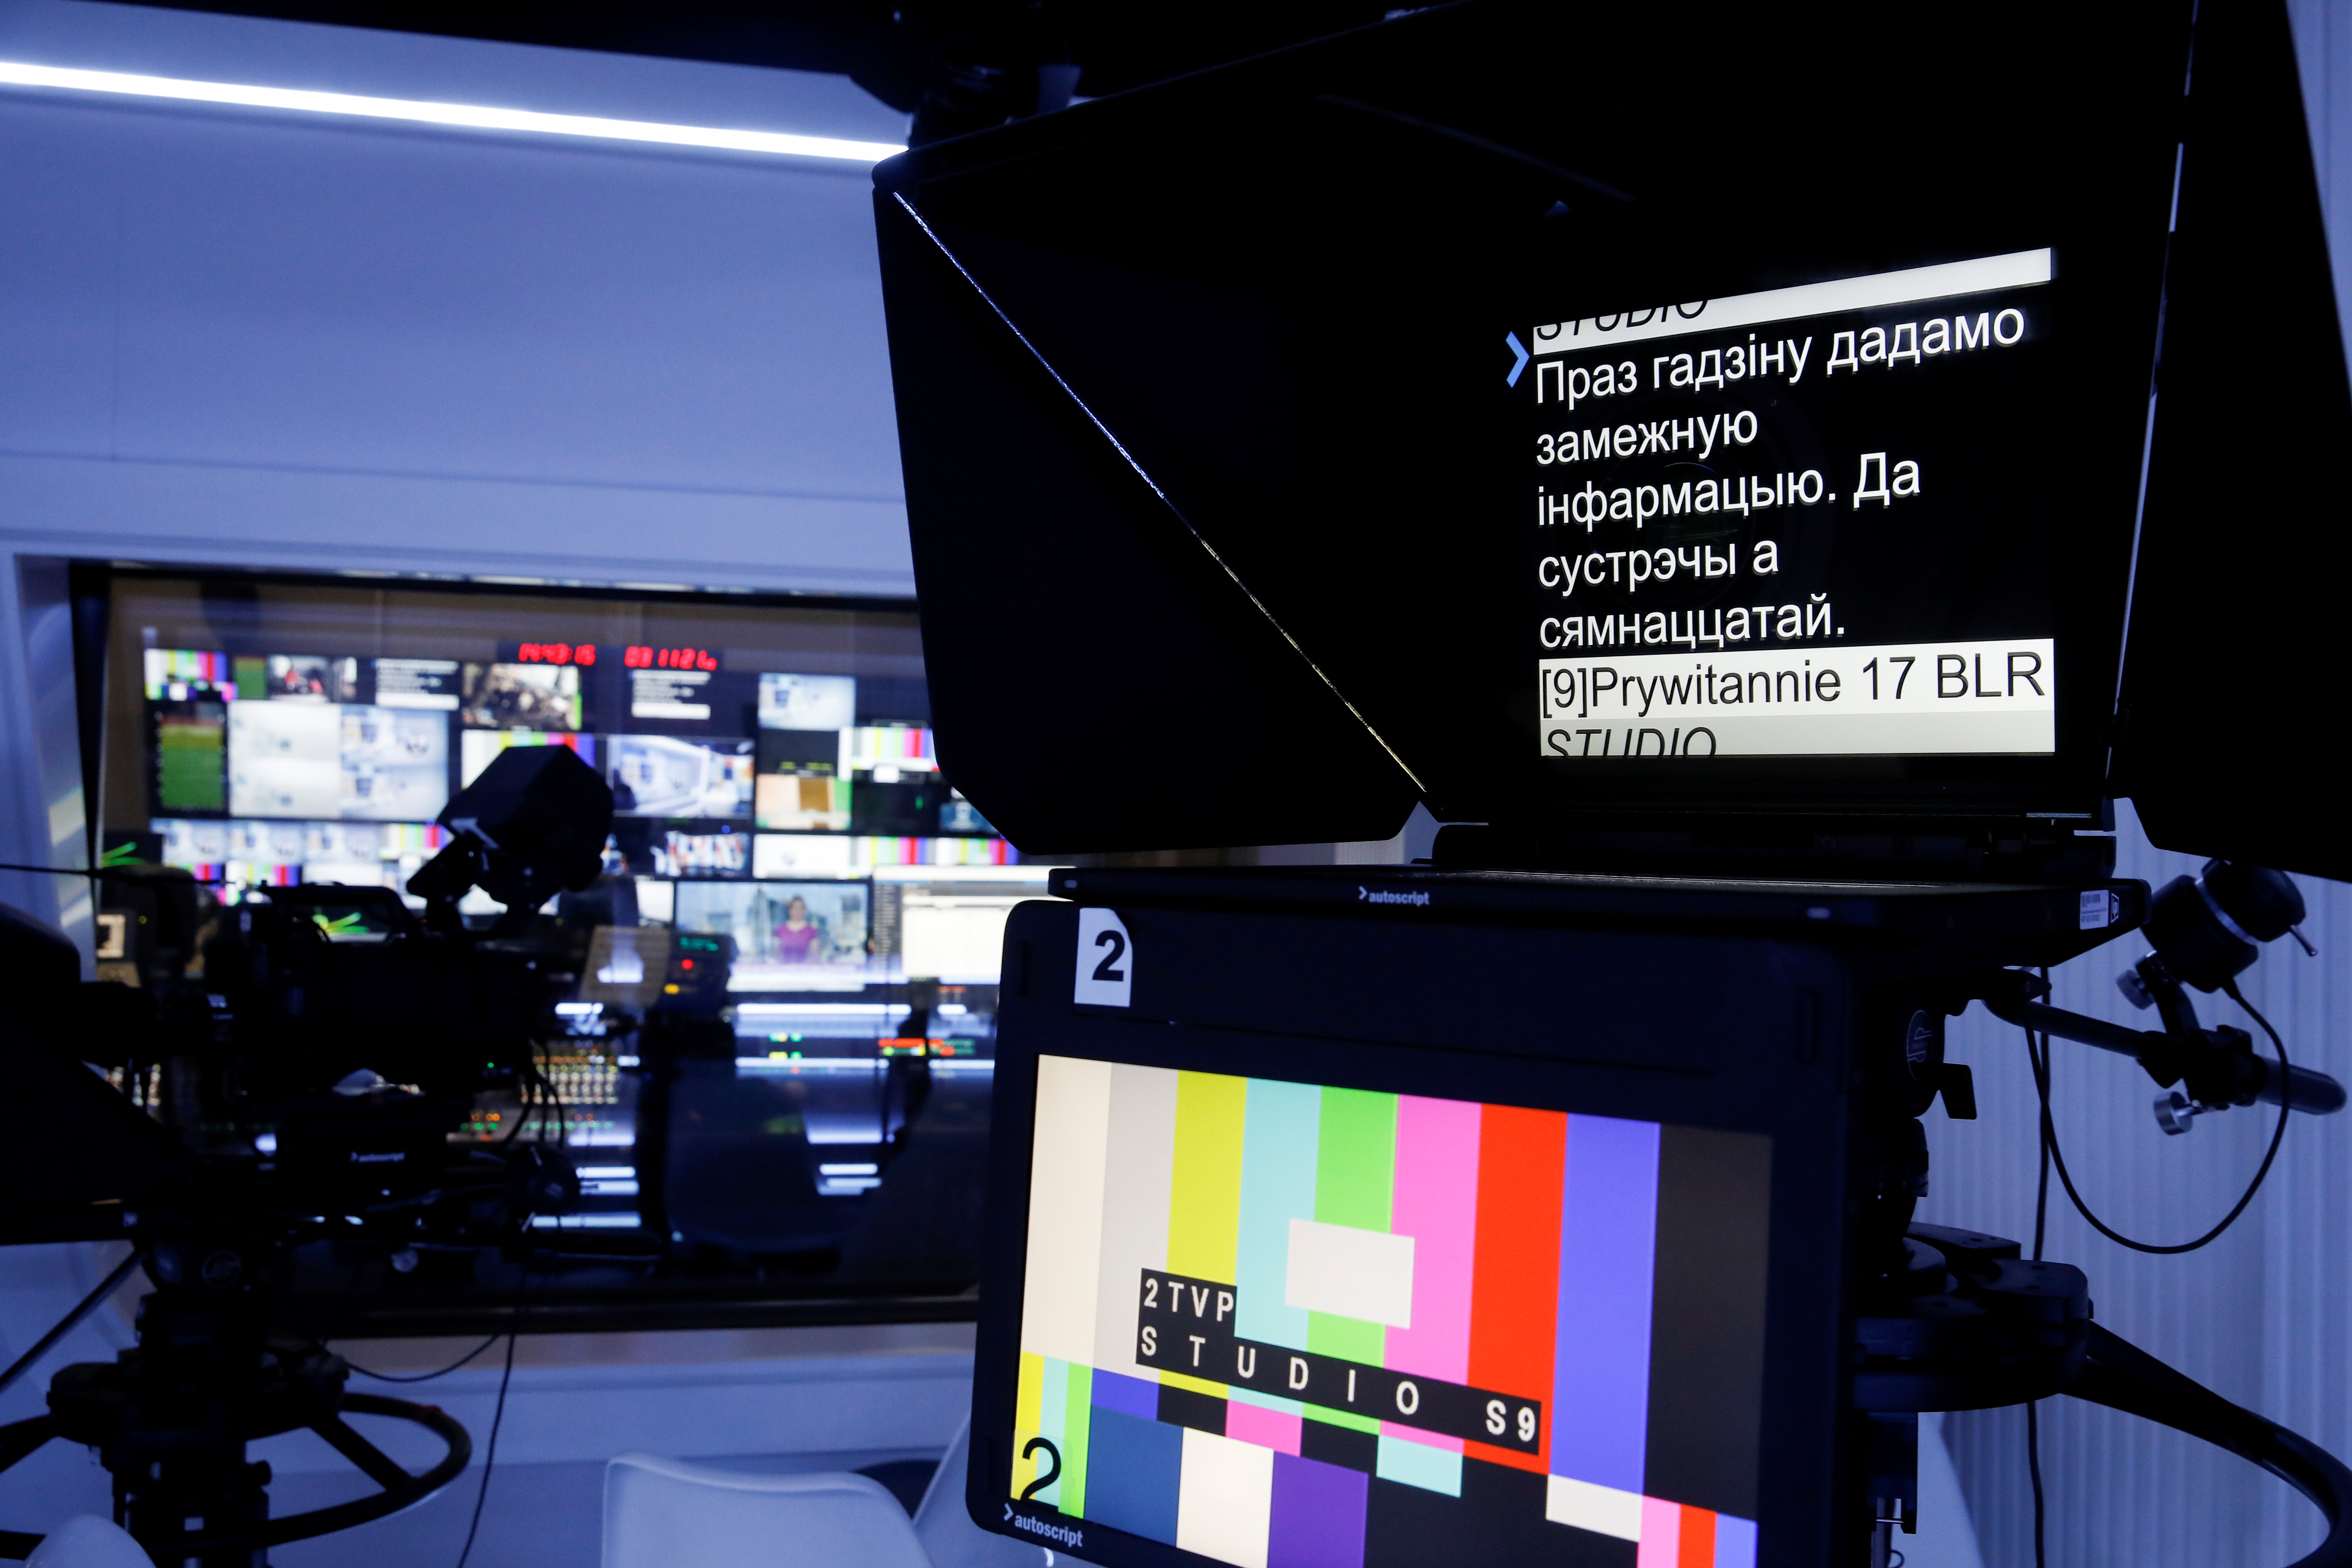 Prompter is pictured at Poland-based Belsat news television channel studio in Warsaw